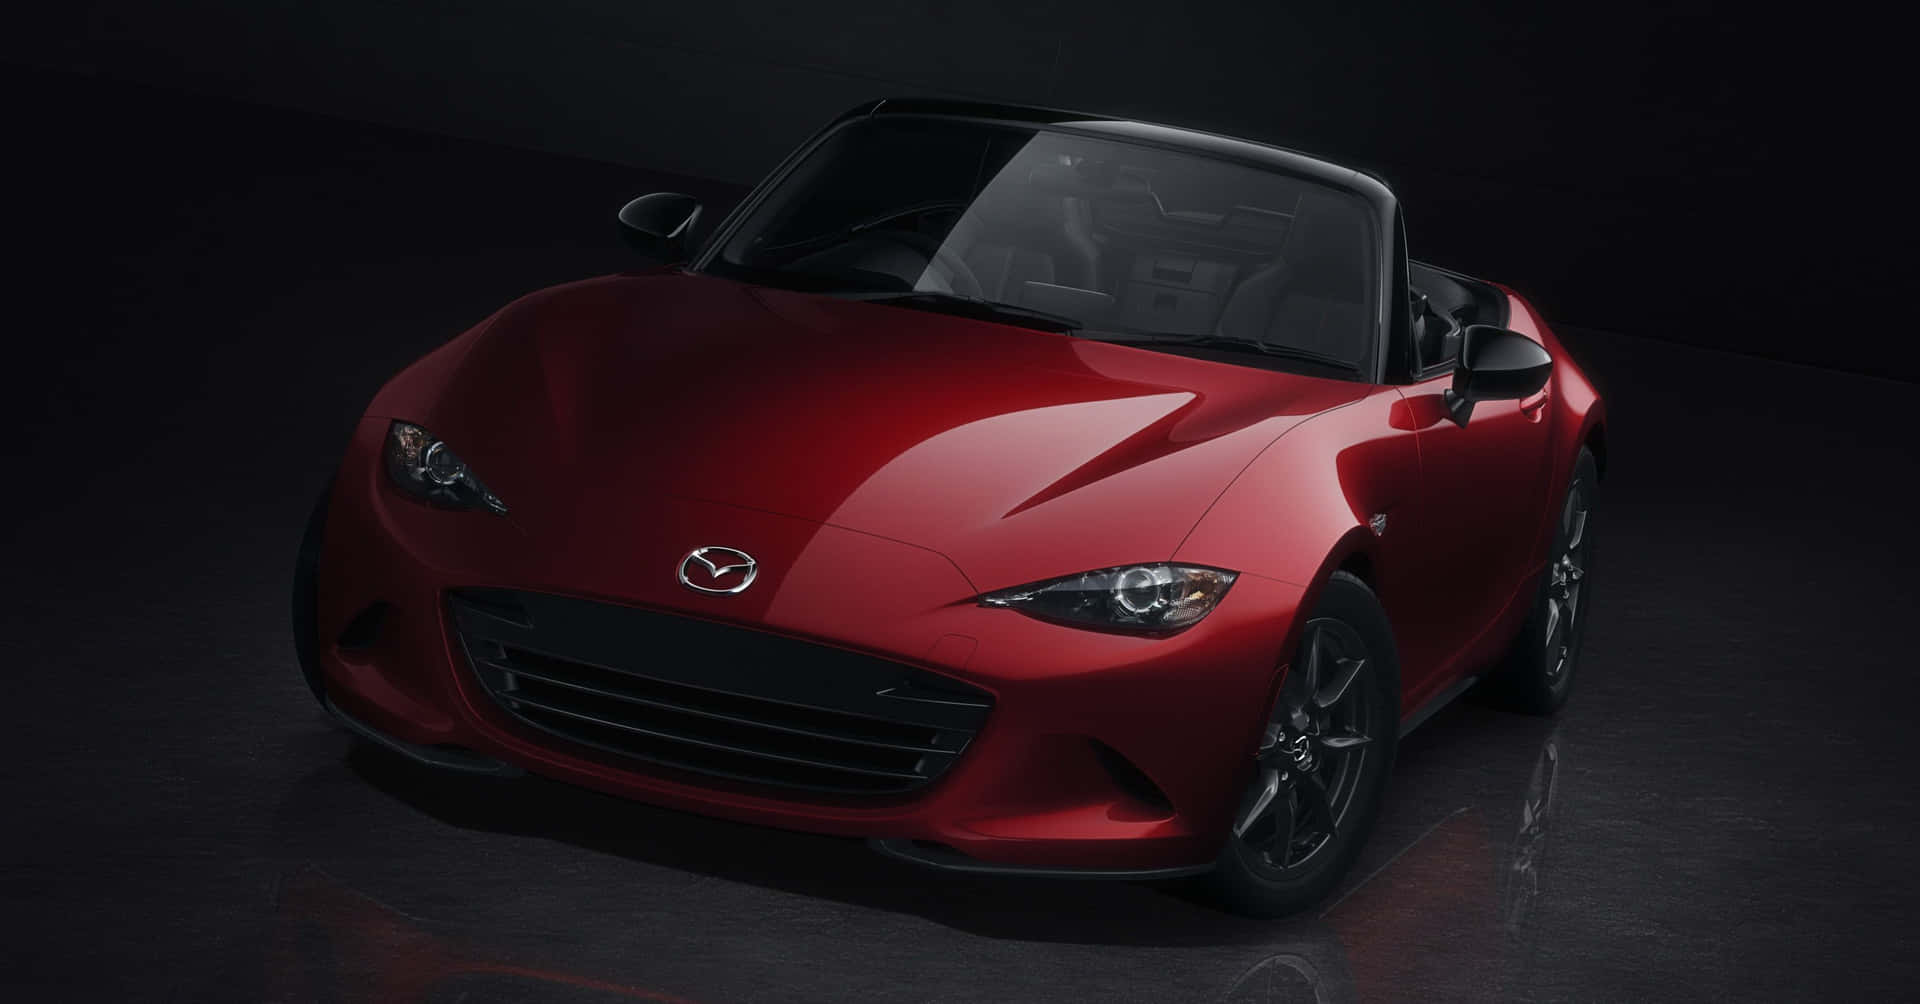 Accelerate your summer days with the new Mazda MX-5 Miata Wallpaper